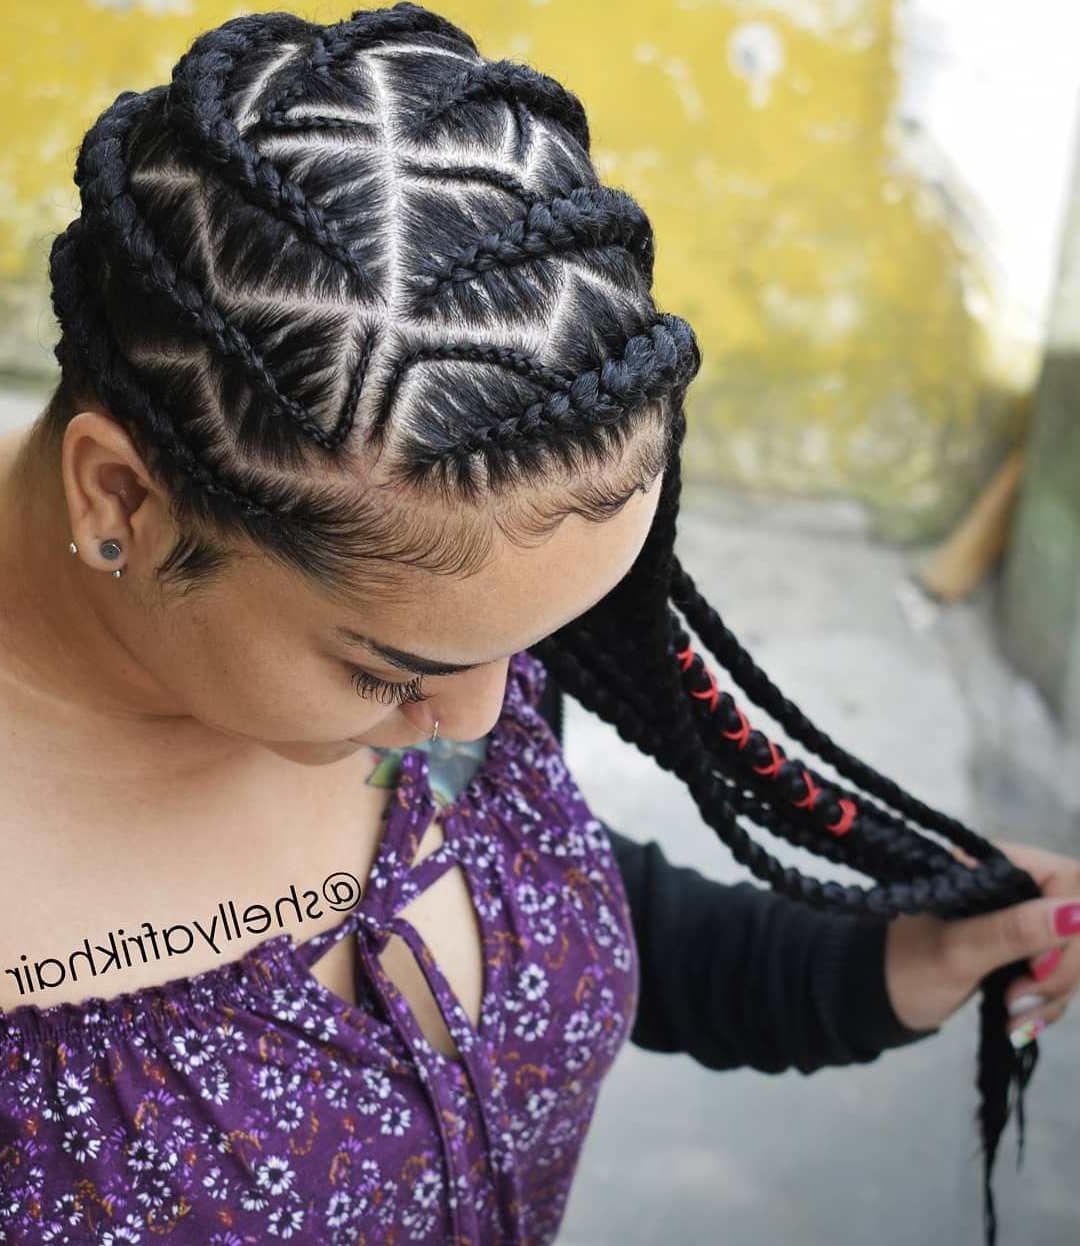 20 Head Turning Lemonade Braid Styles For All Ages With Regard To Recent Purple Passion Chunky Braided Hairstyles (View 5 of 20)